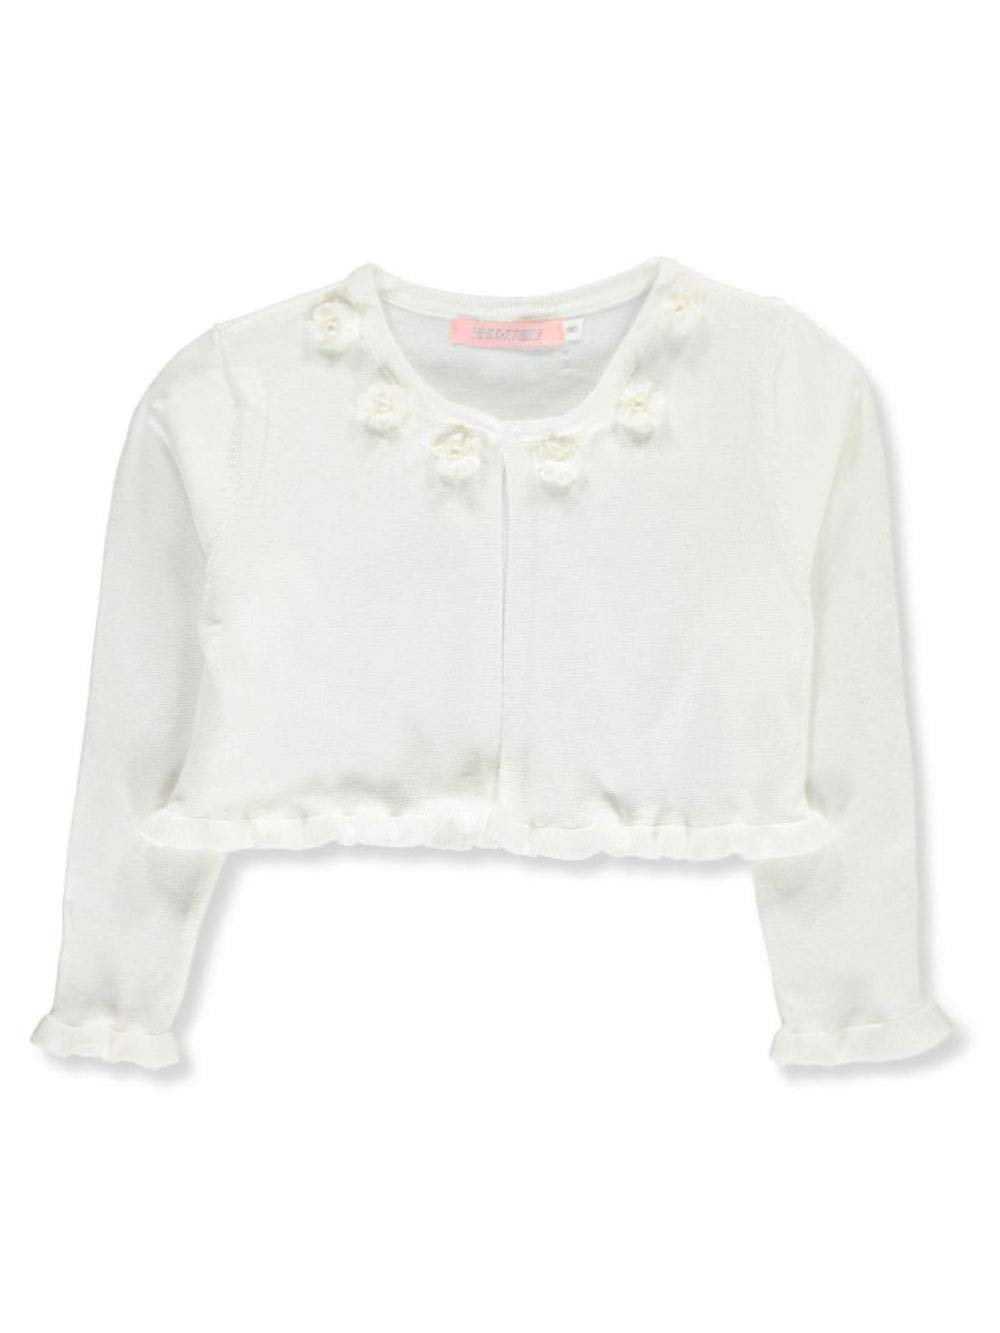 Pink Butterfly Girls' Flower and Pearl Knit Shrug